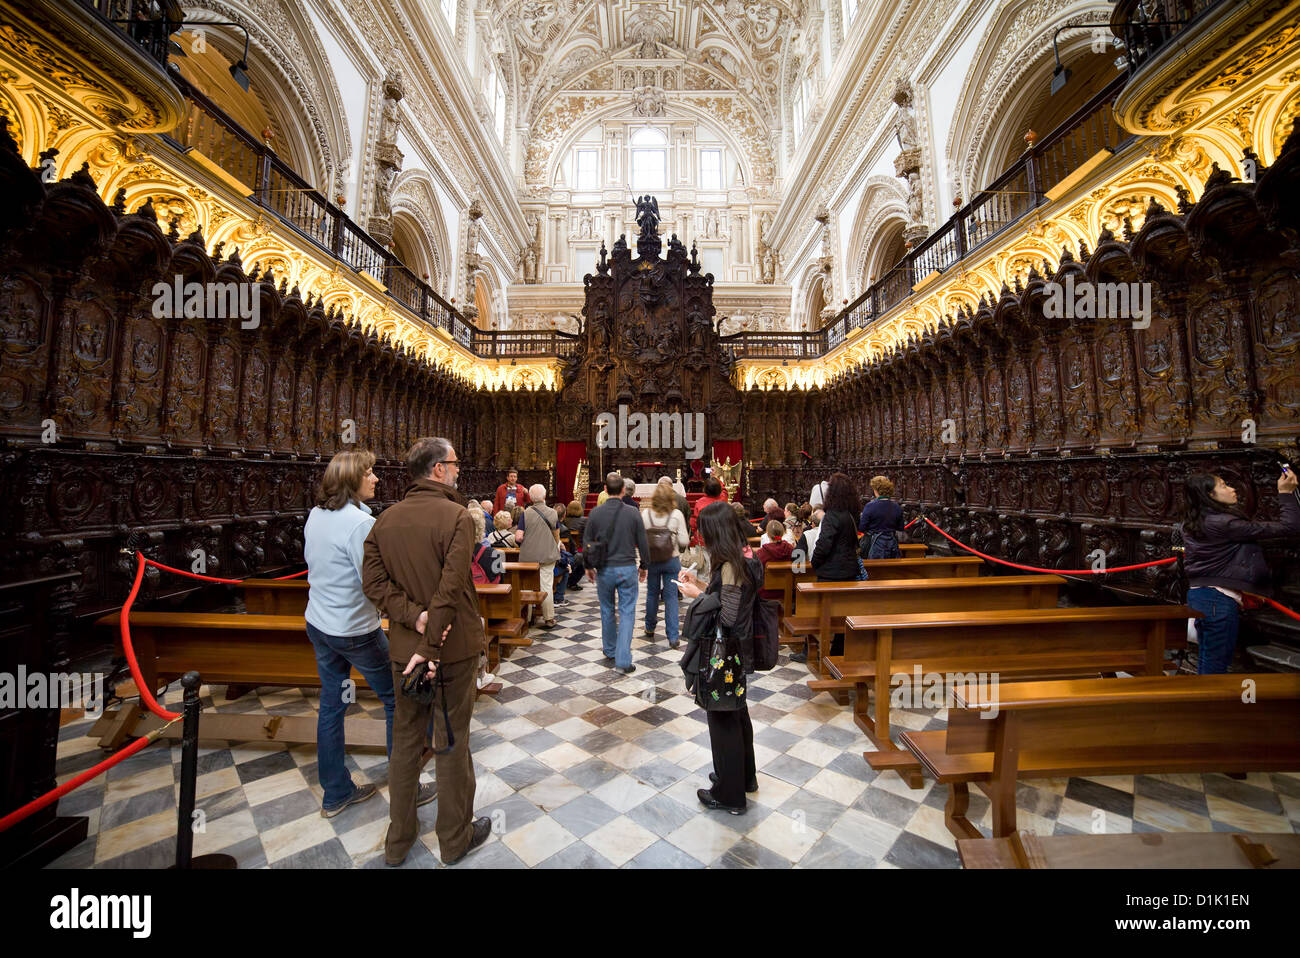 Mahogany choir stalls and group of tourists on a tour inside the Mezquita Cathedral in Cordoba, Andalucia, Spain. Stock Photo